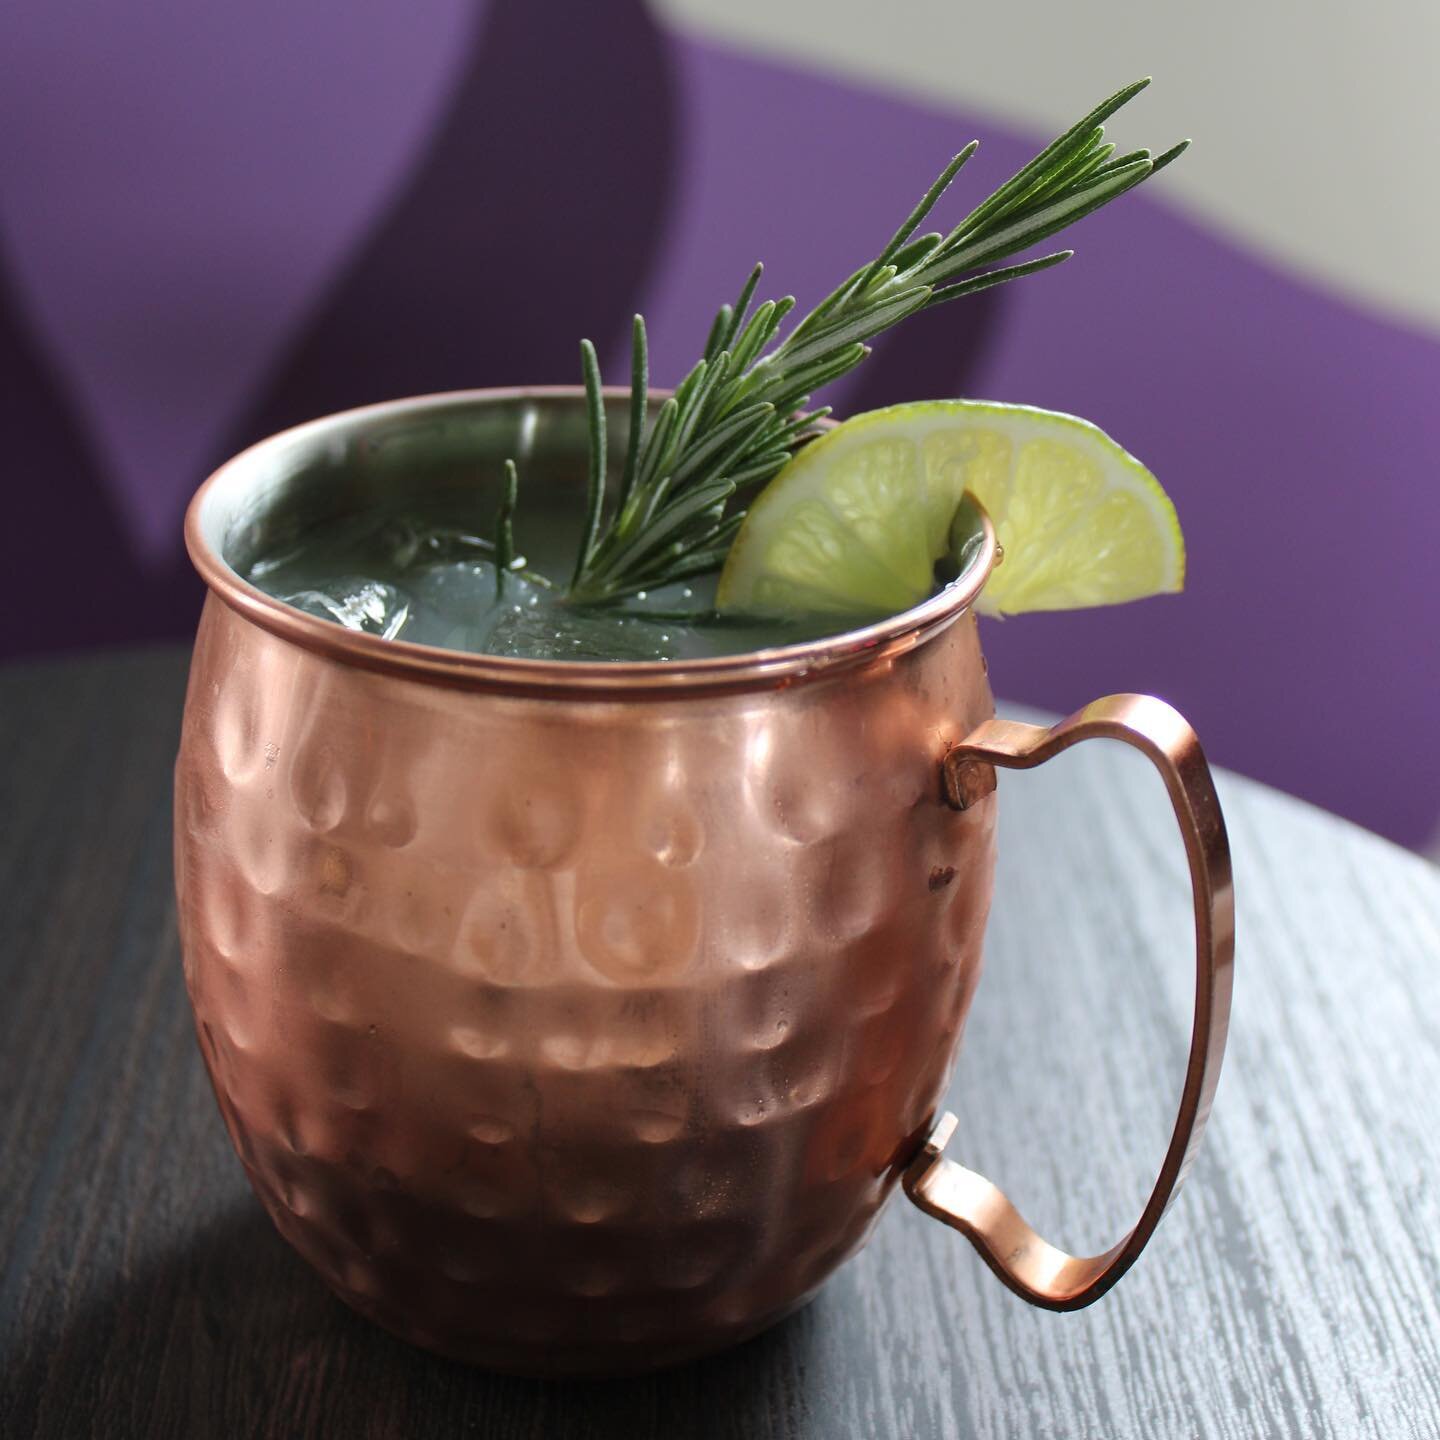 Today&rsquo;s Forcast: 100% chance of Moscow Mules, 0% chance of alcohol. Come try one of our mocktails! 😎 Live music from @jaydencornett starts at 7pm. 🎶

#relaxation #nightout #alcoholfree #alcoholfreeliving #moscowmule #lavender #limejuice #kava